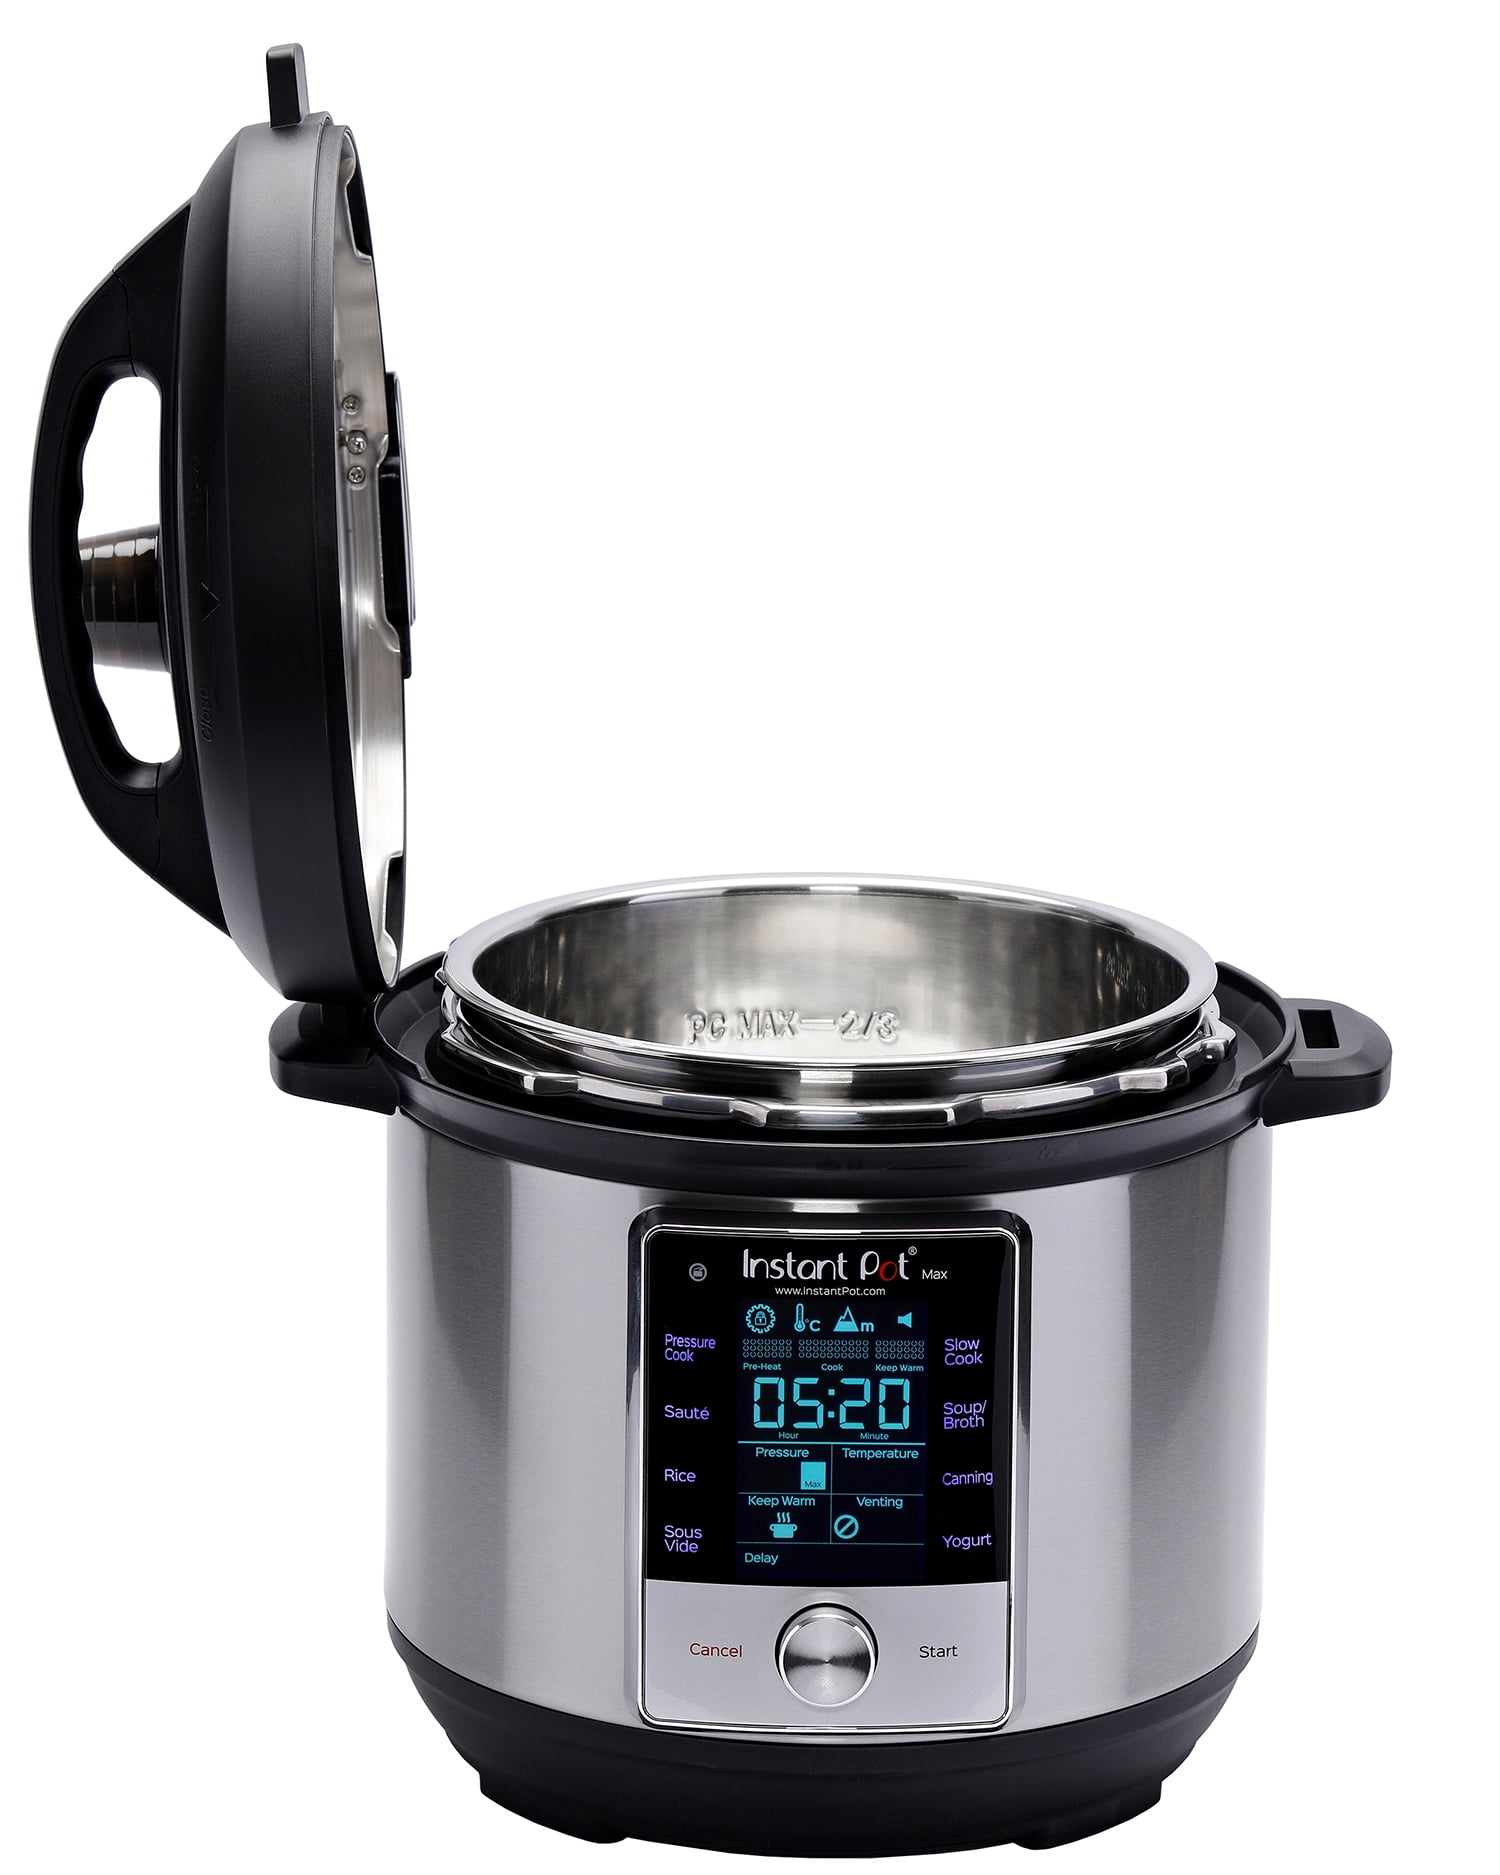 Rent to Own Instant Pot 6-Qt. Pressure Cooker Instant Pot Star Wars™ Duo™  at Aaron's today!